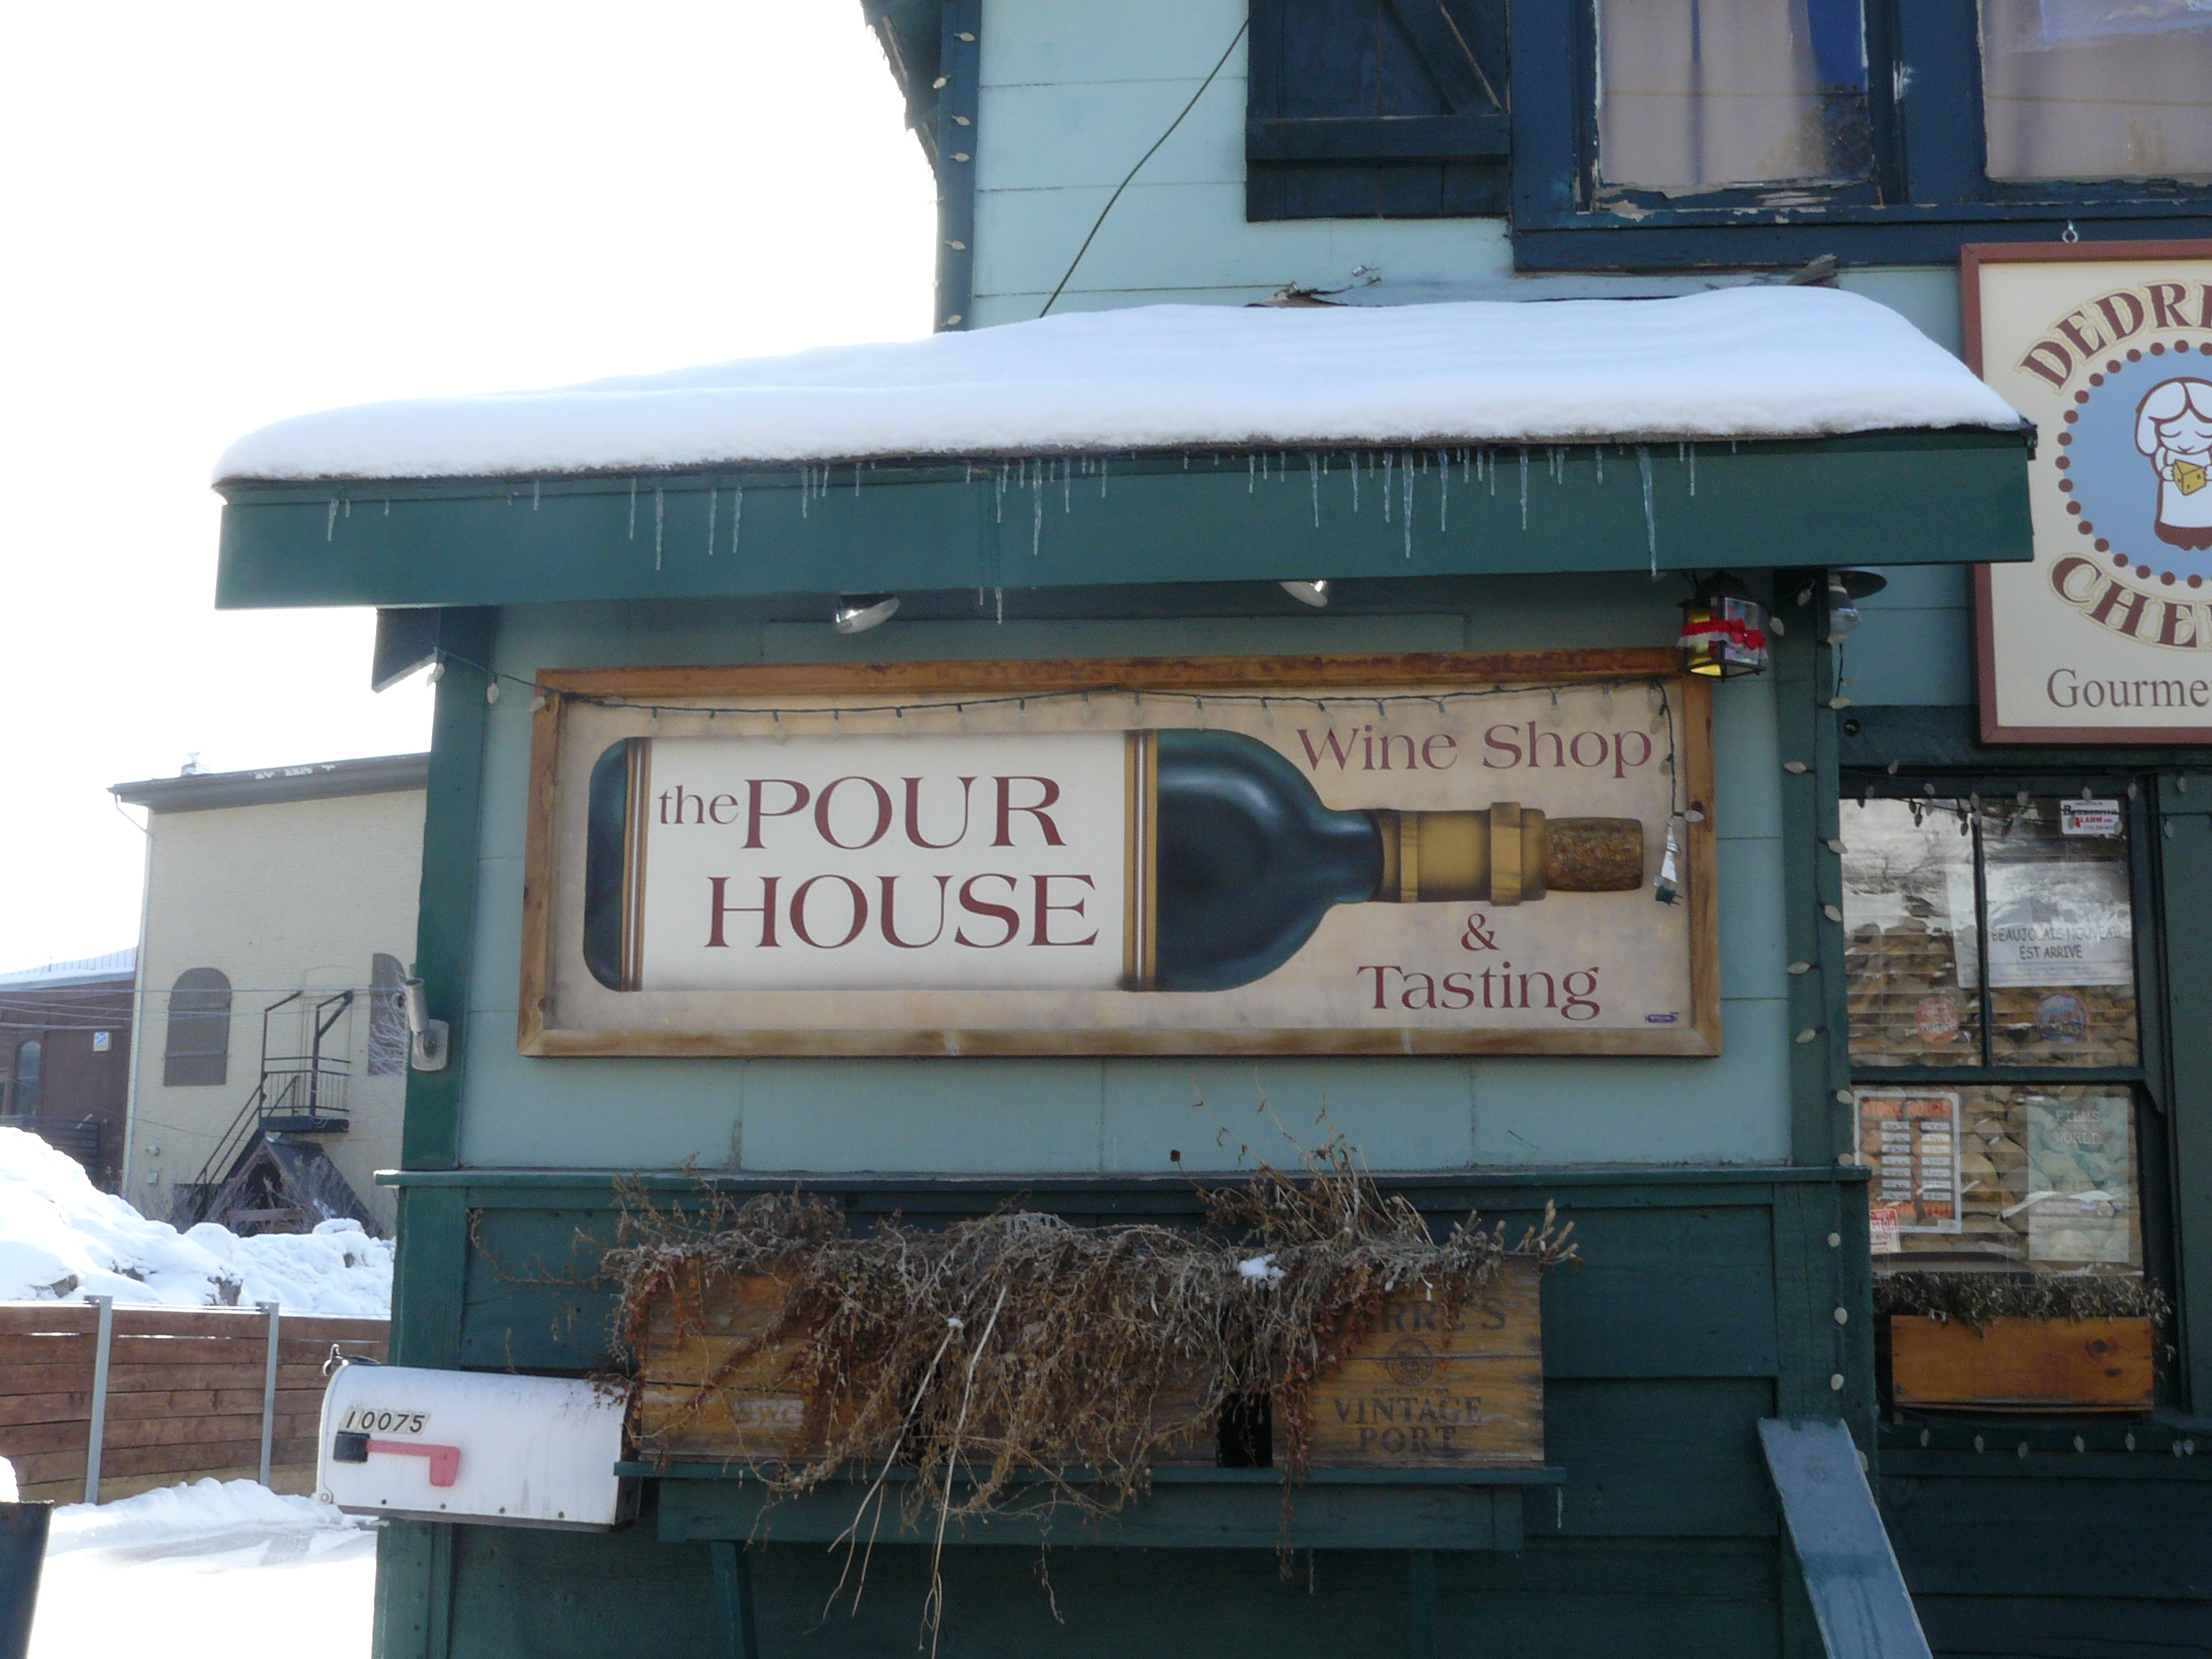 The Pour House (Wine Shop & Tasting) in Truckee, California!